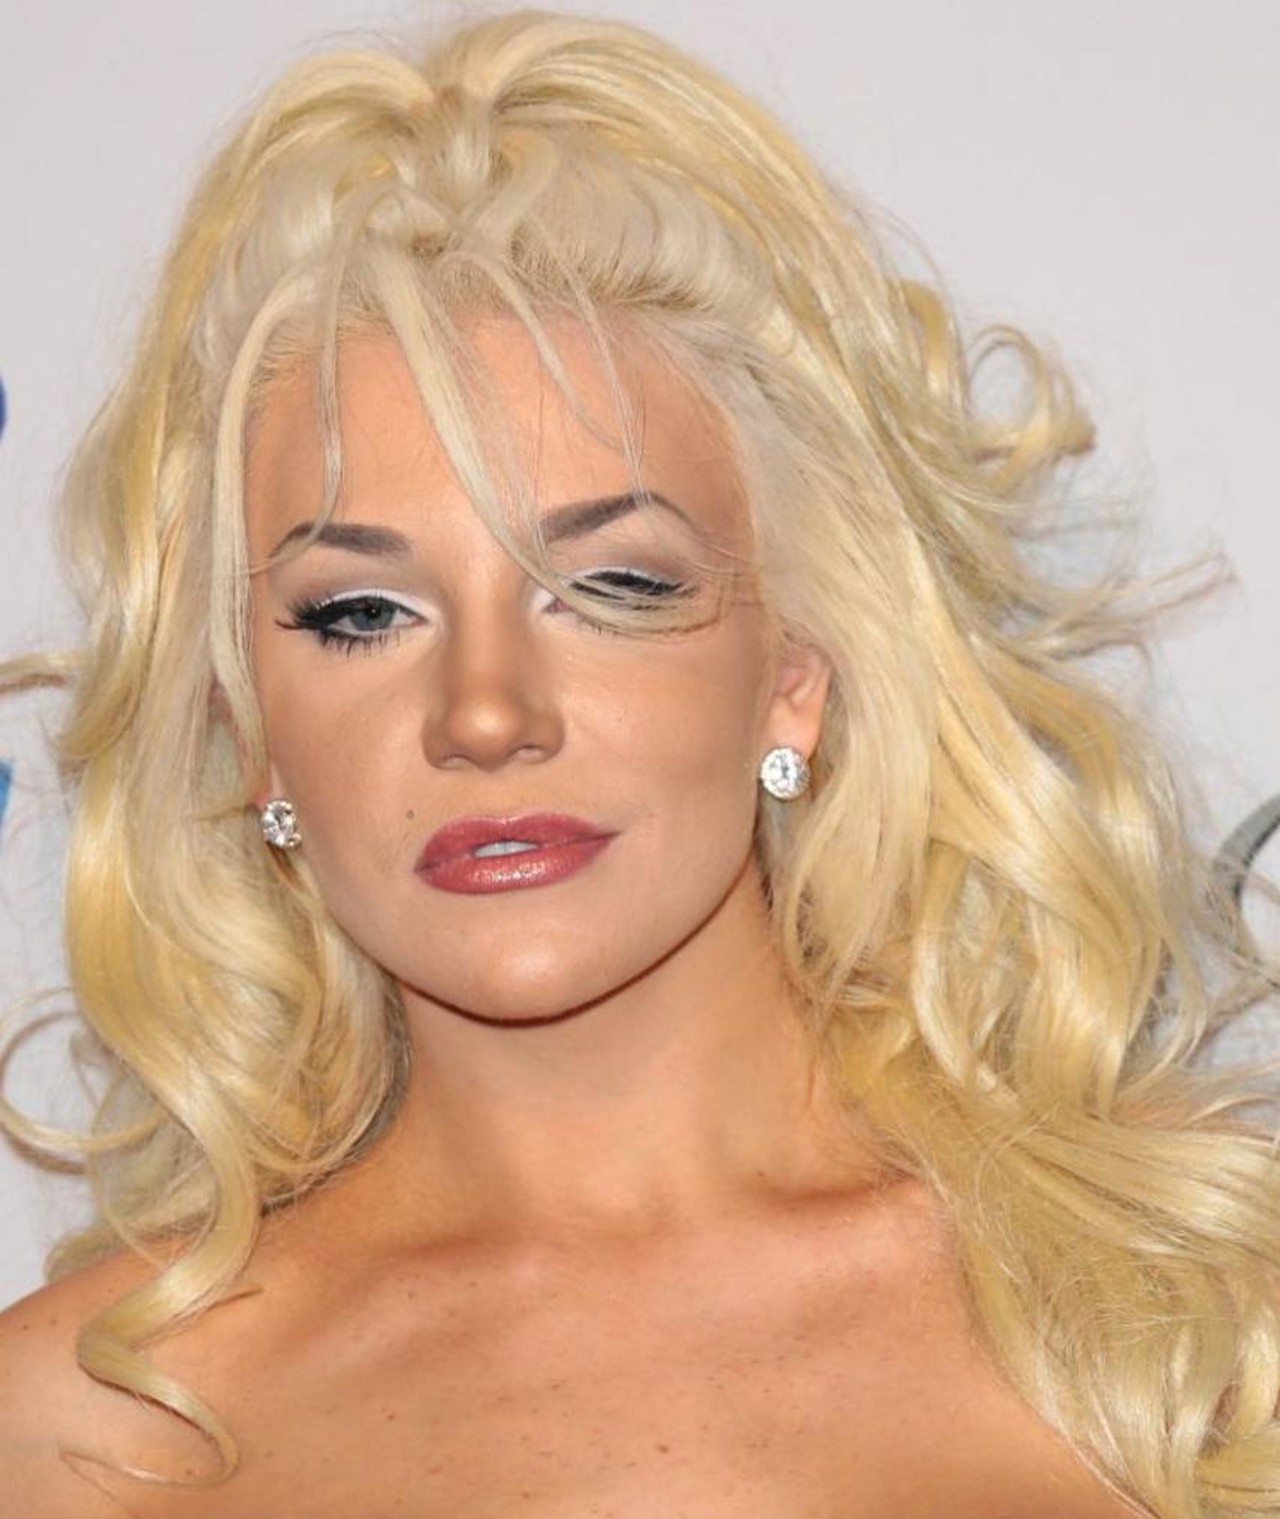 Courtney Stodden Movies, Bio and Lists on MUBI